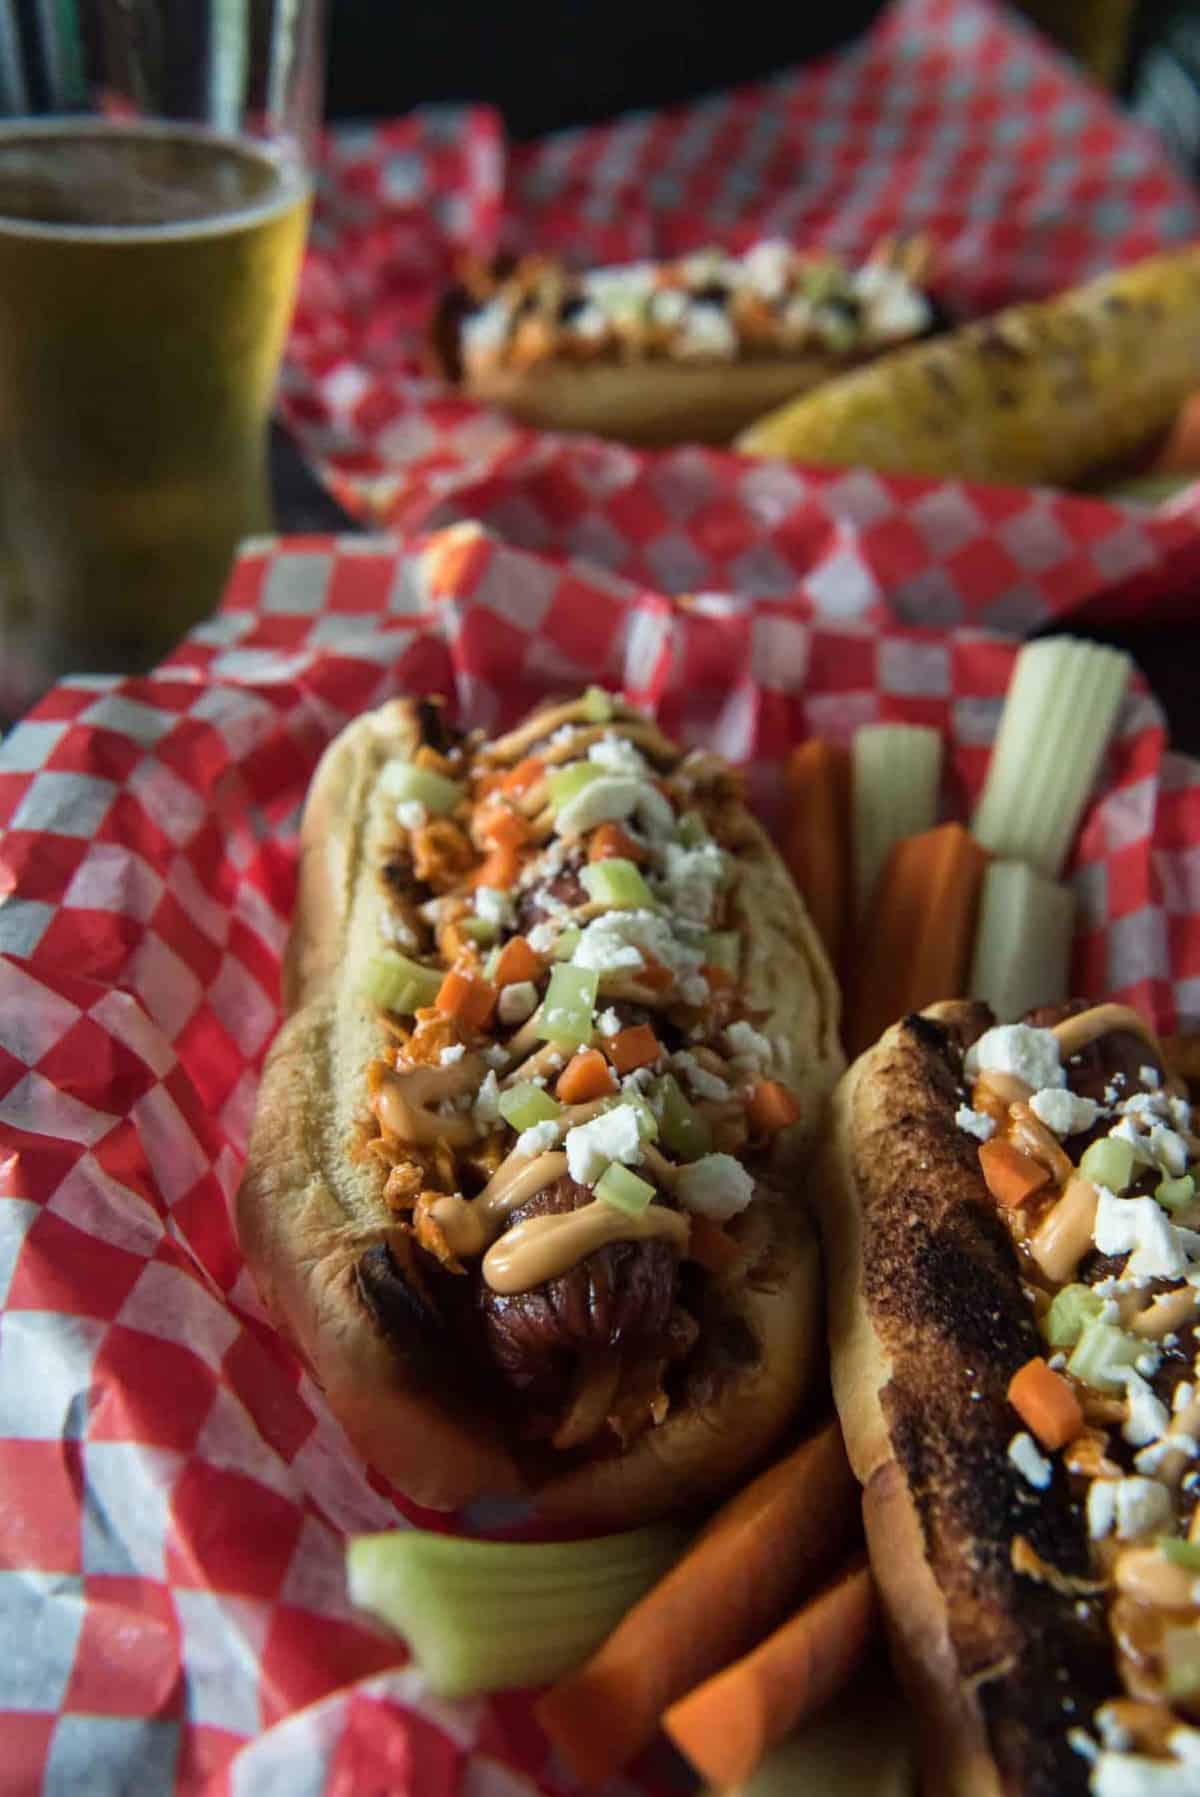 Summer grilling with a kick! Top your Buffalo Hot Dogs with shredded Buffalo chicken, zesty Buffalo mayo, chopped celery & carrots, and blue cheese (or Feta for BCHaters) for a change of pace in your hum-drum dog game!